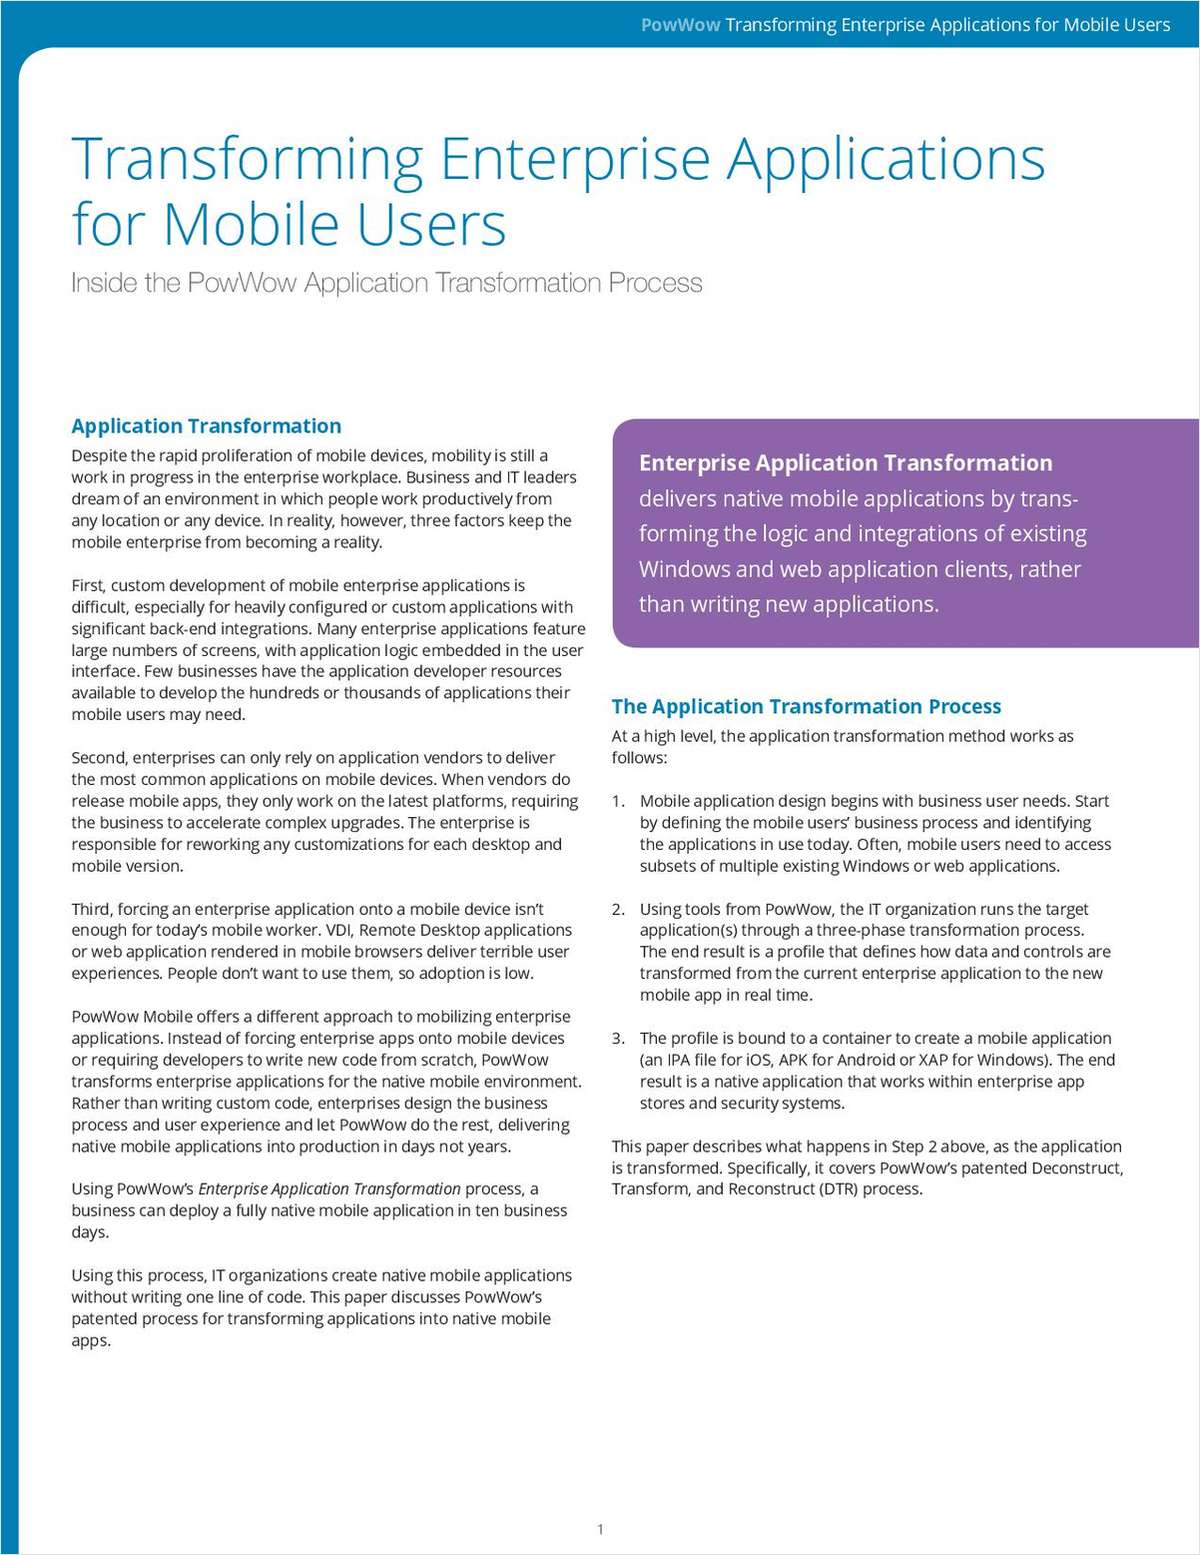 New Whitepaper: Transforming Enterprise Applications for Mobile Users